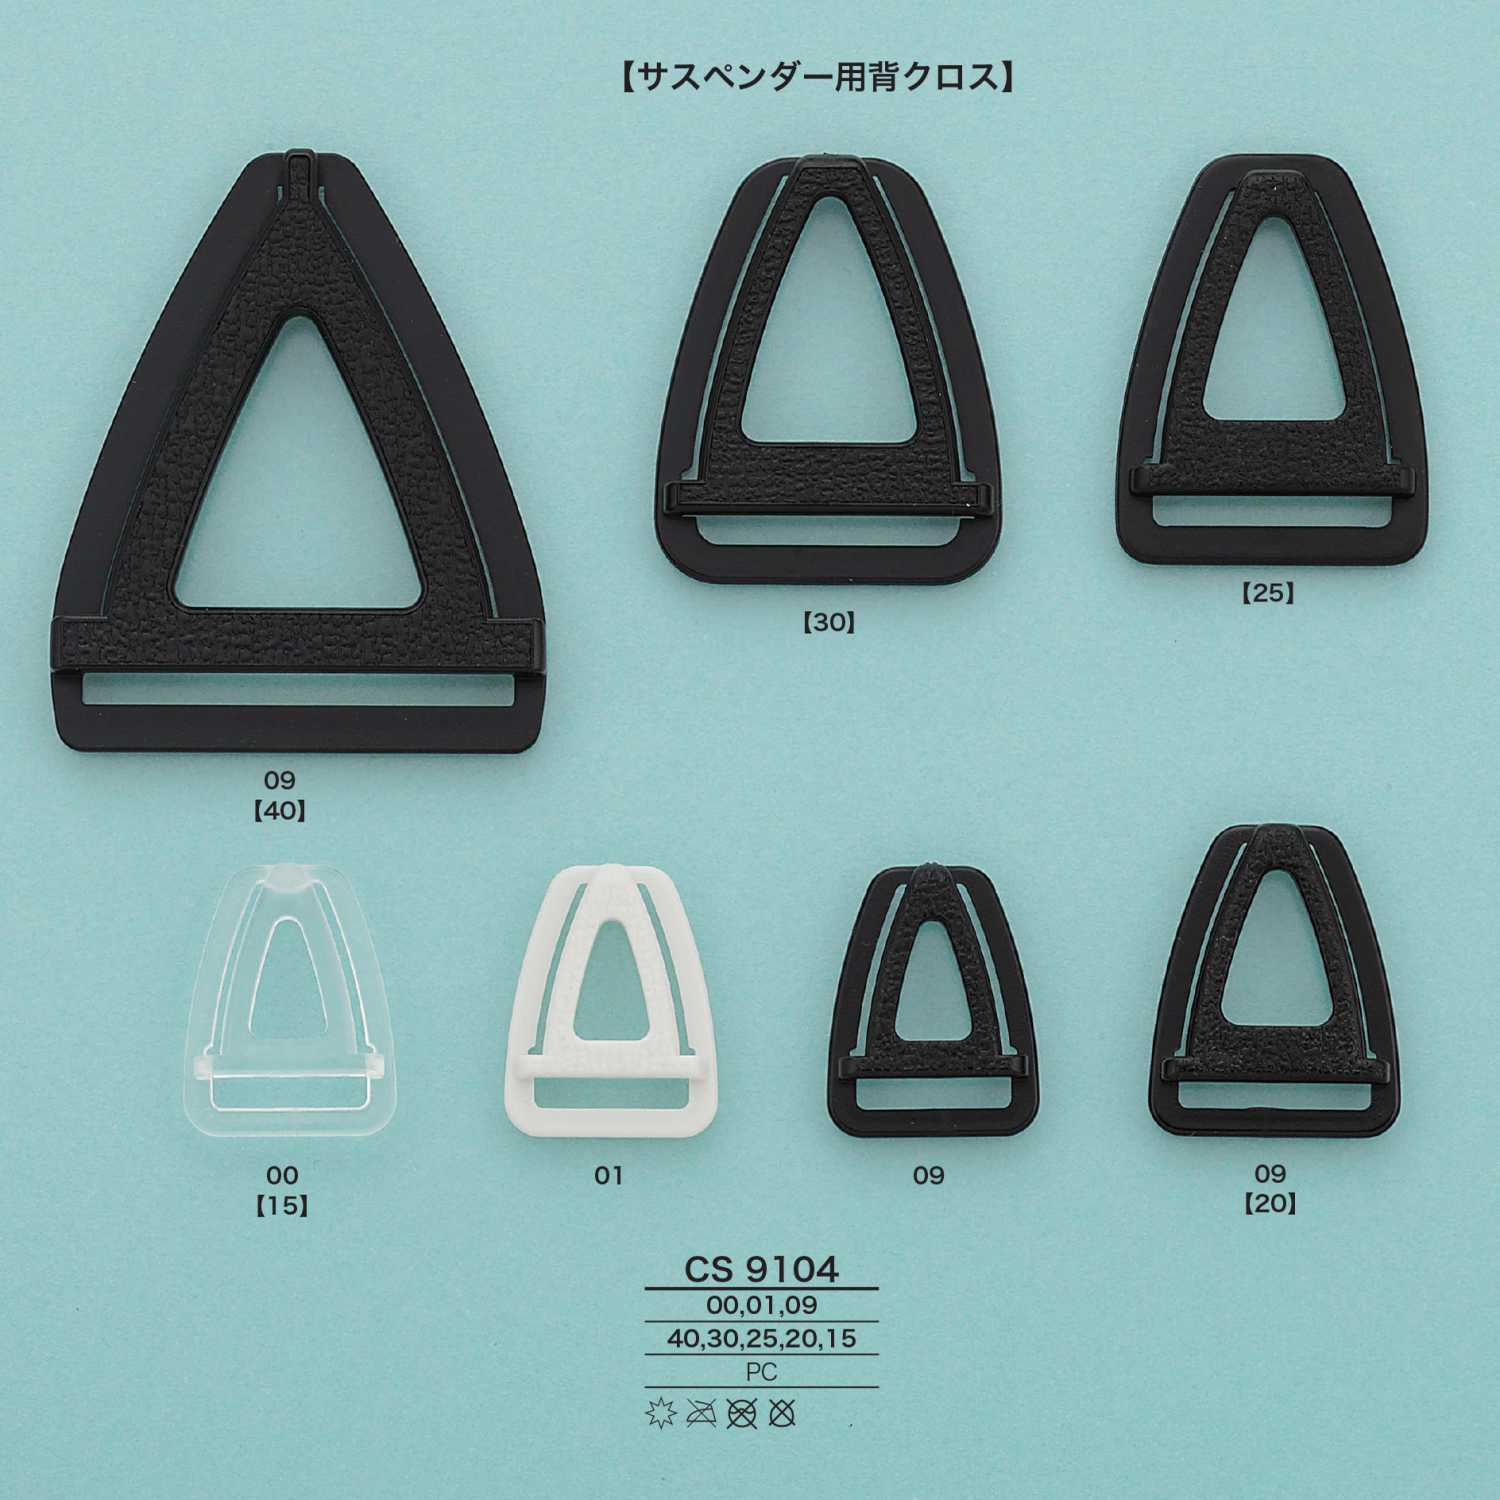 CS9104 Back Cloth For Suspenders[Buckles And Ring] IRIS